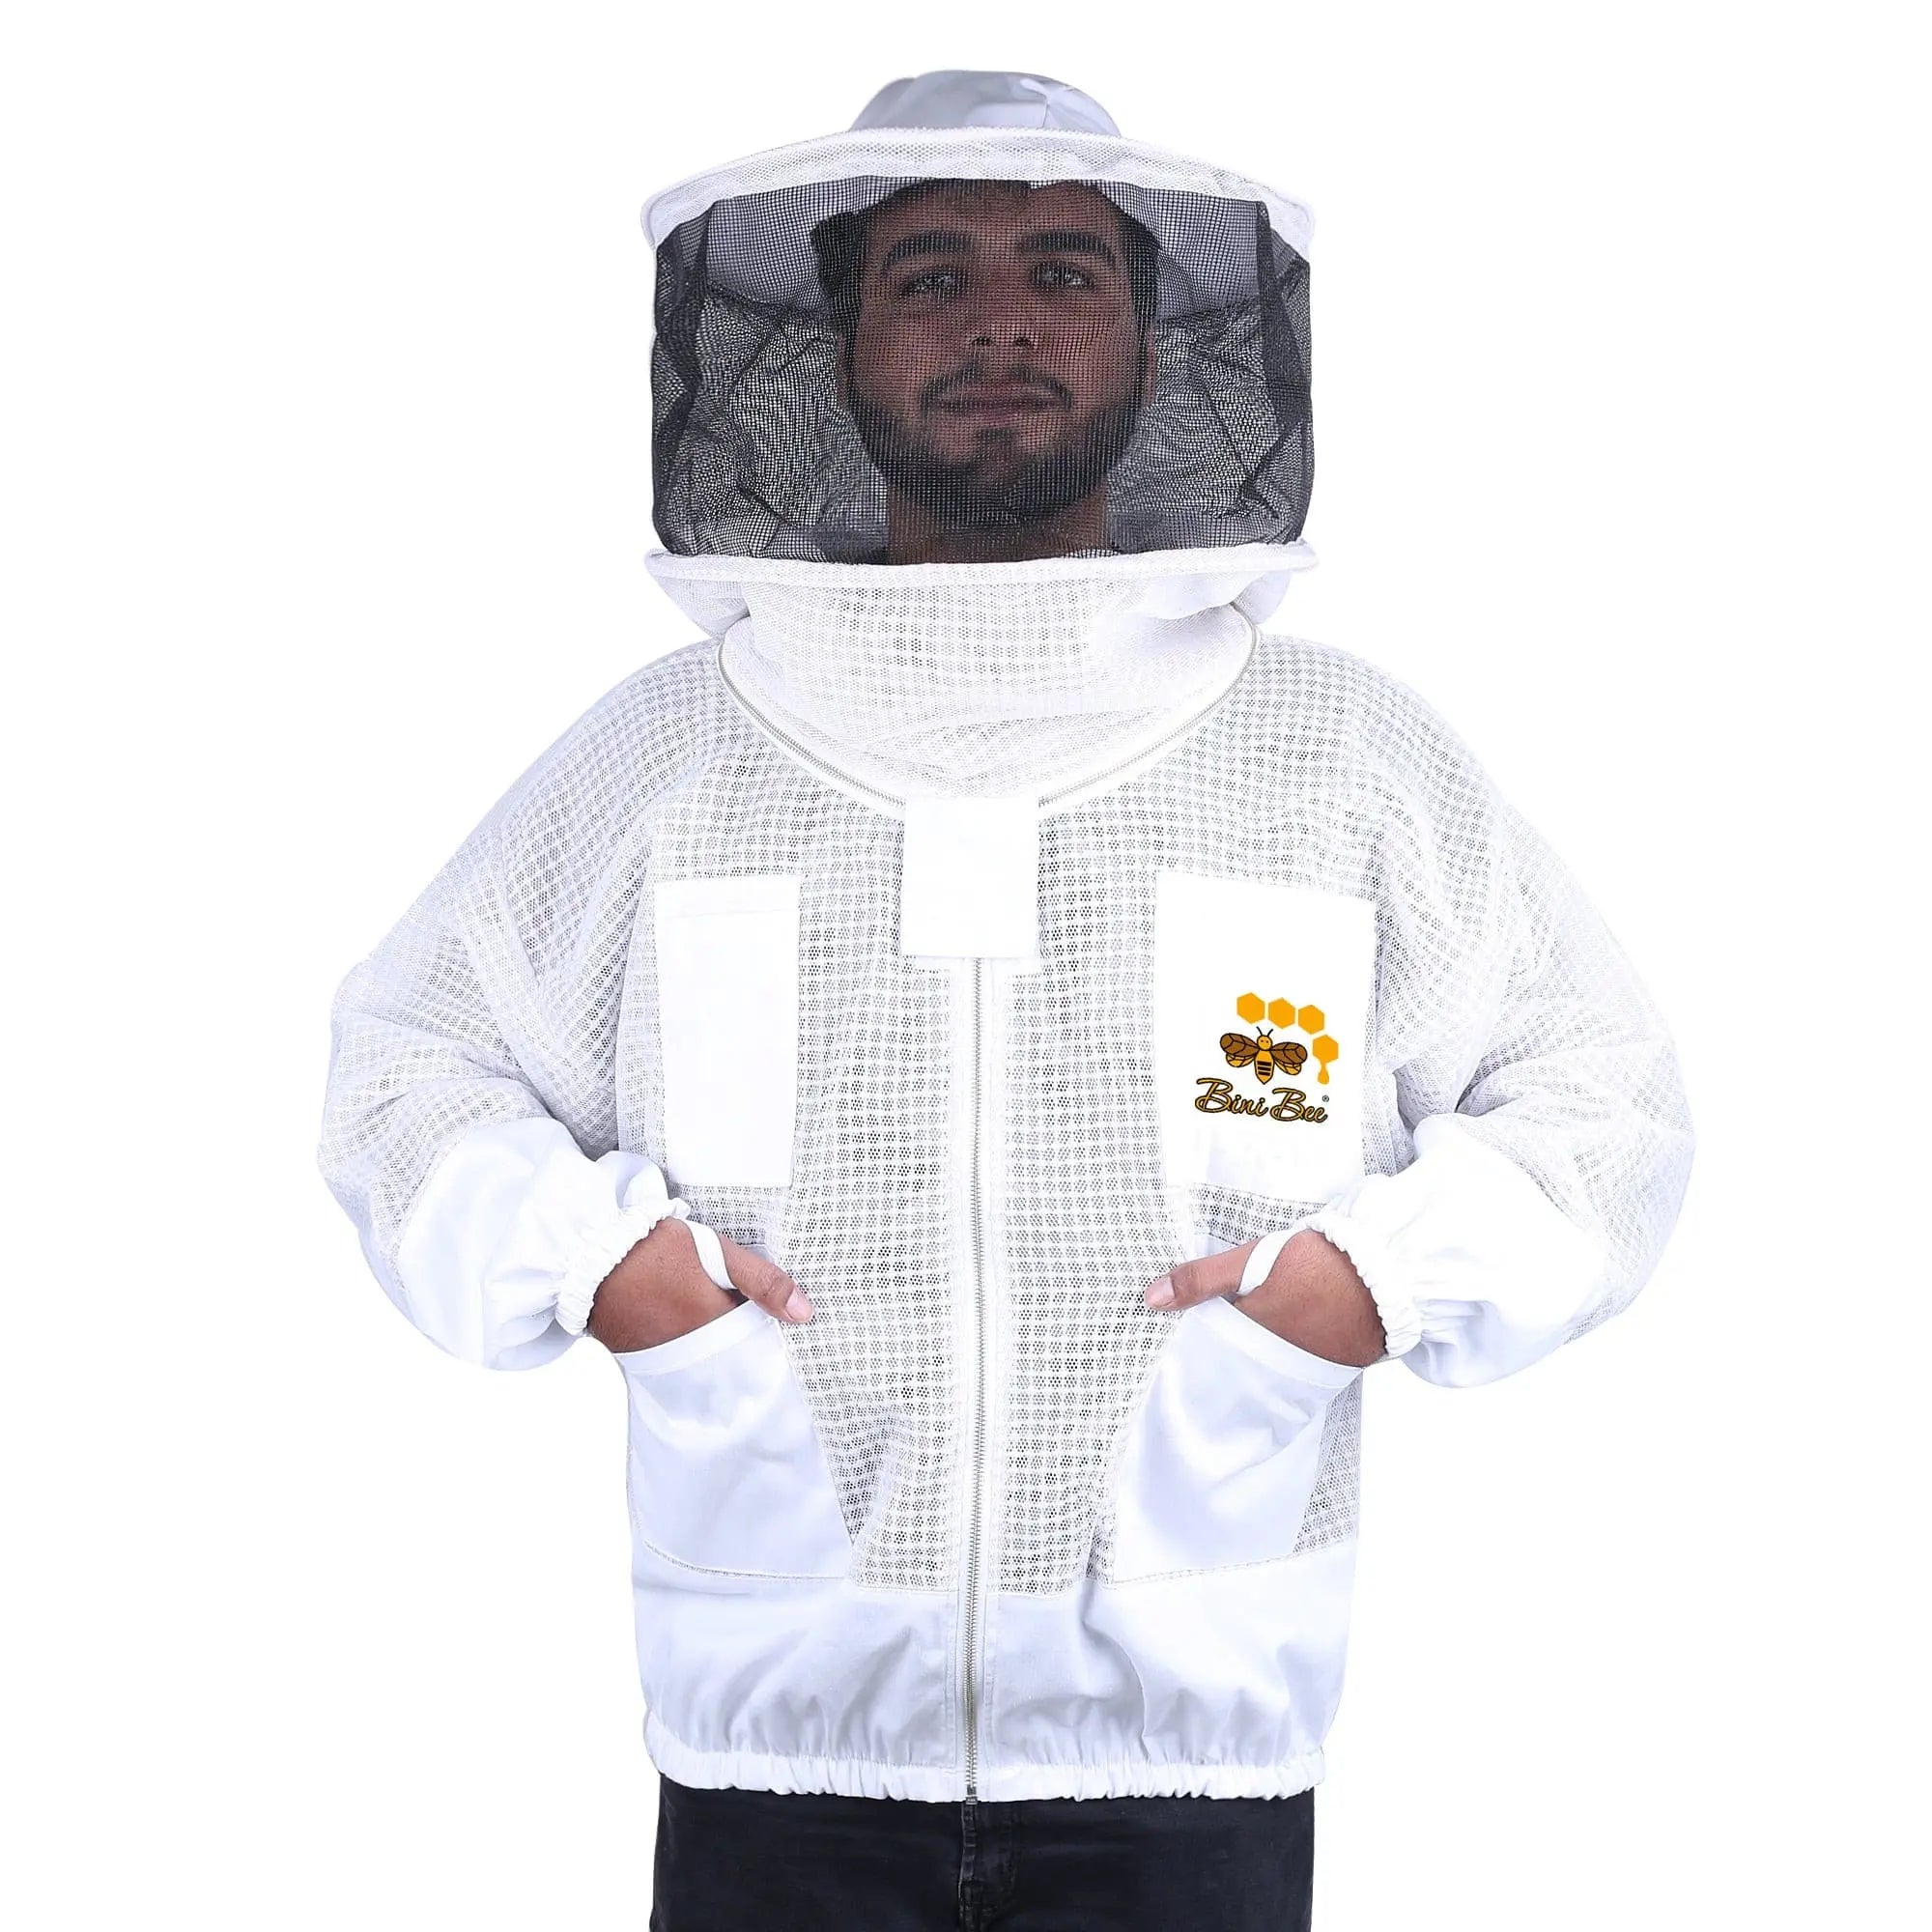 3 Layer Mesh Ventilated Beekeeping Jacket With Round Head Veil Bini Bees